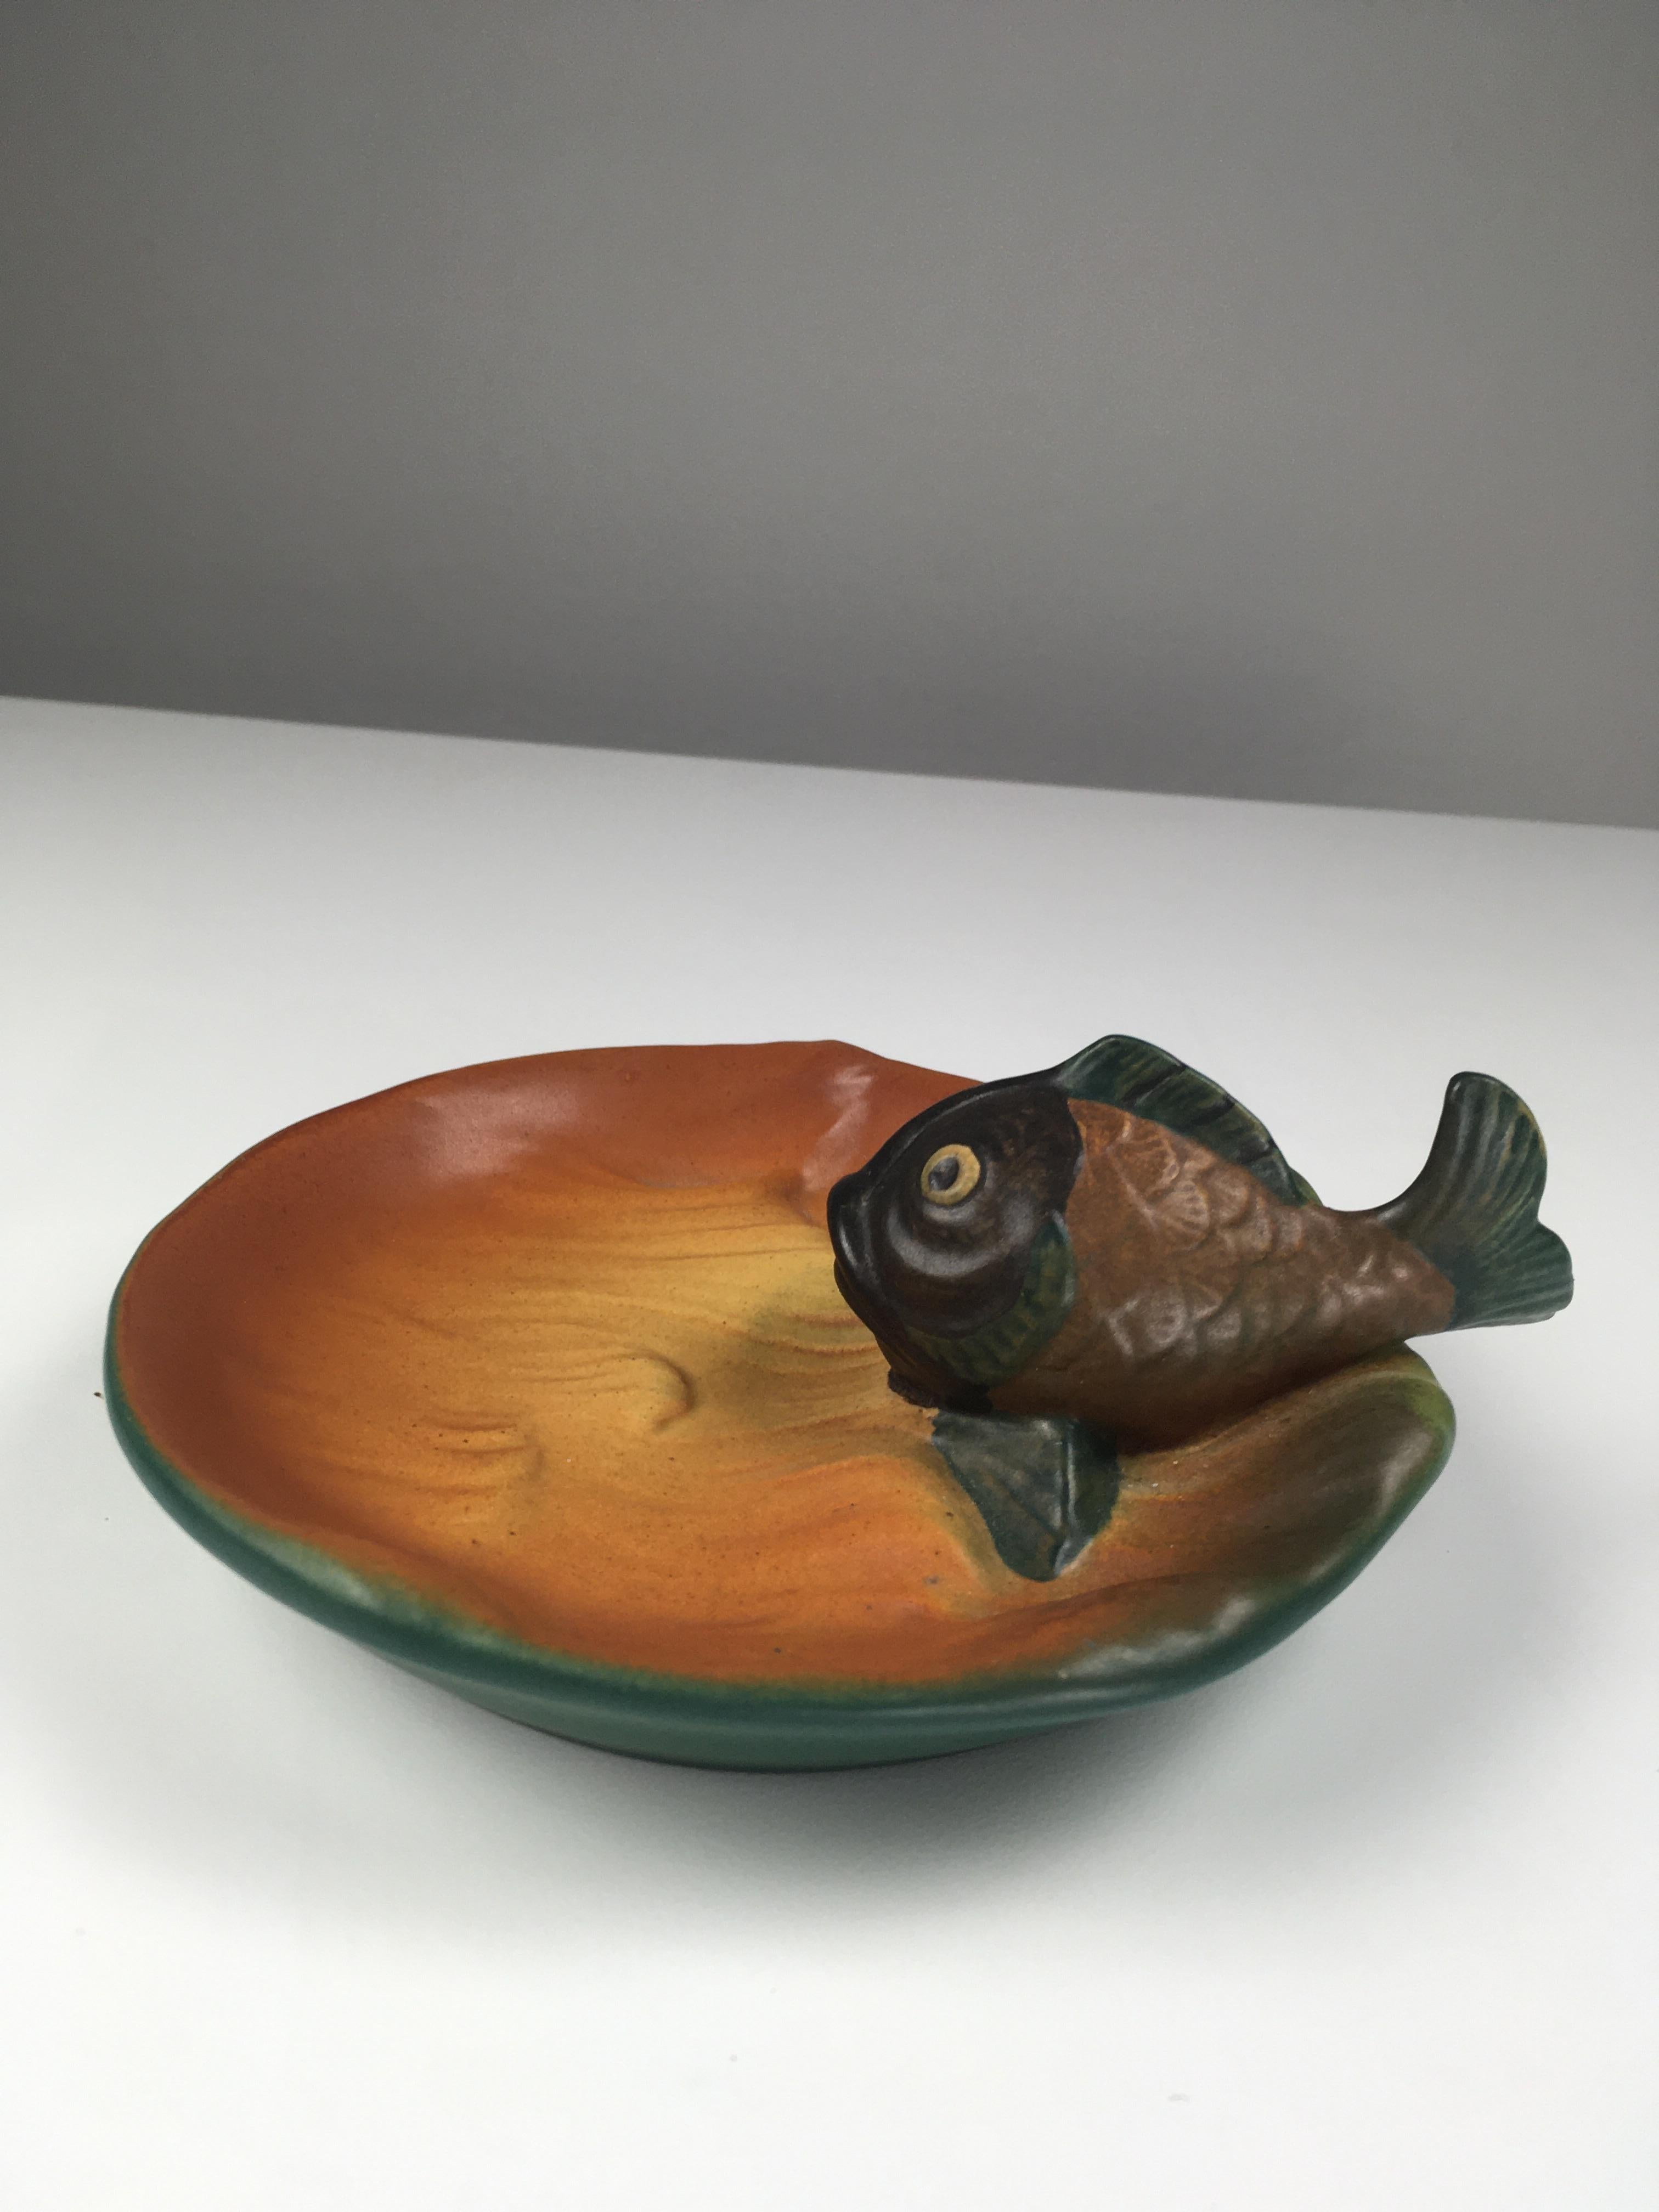 Danish Art Nouveau fish ash tray / bowl designed by Axel Sørensen in 1927 for P. Ipsens Enke.

The art nuveau ash tray / bowl feature a well made hand crafted lively fish and is in excellent condition.

Ipsens Enke (1843 - 1955) was a very